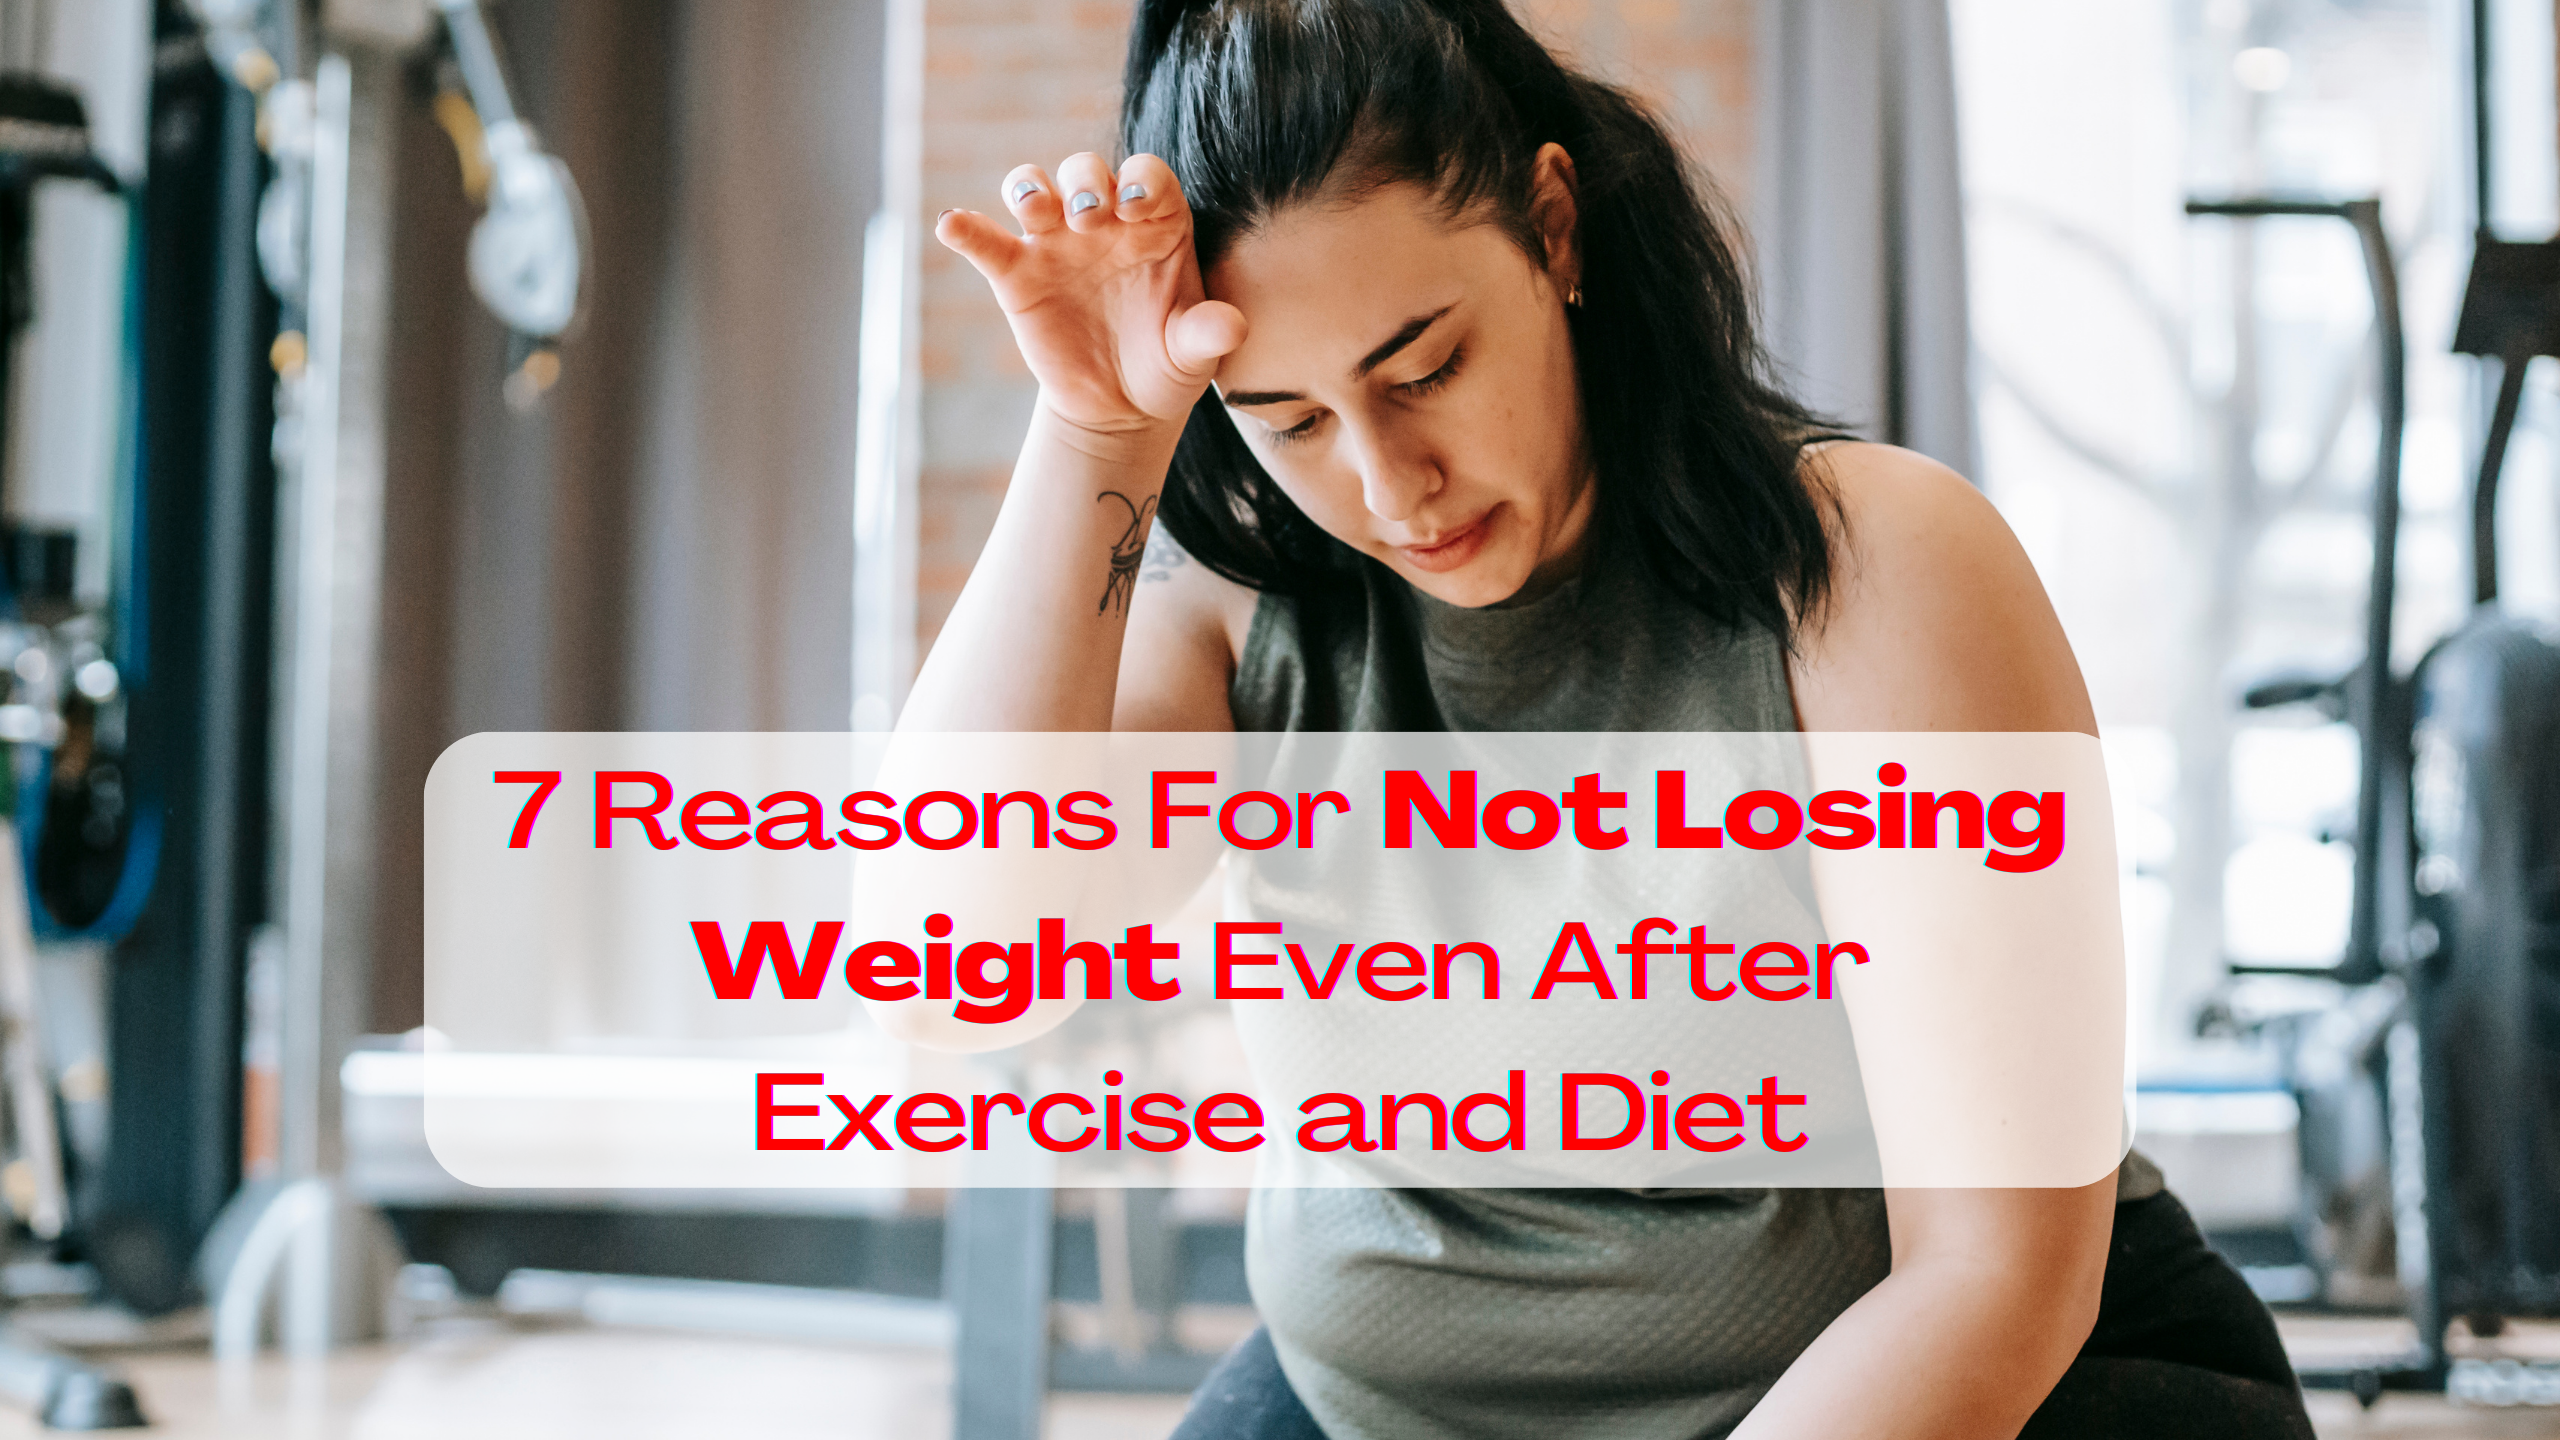 7 Reasons For Not Losing Weight Even After Exercise and Diet